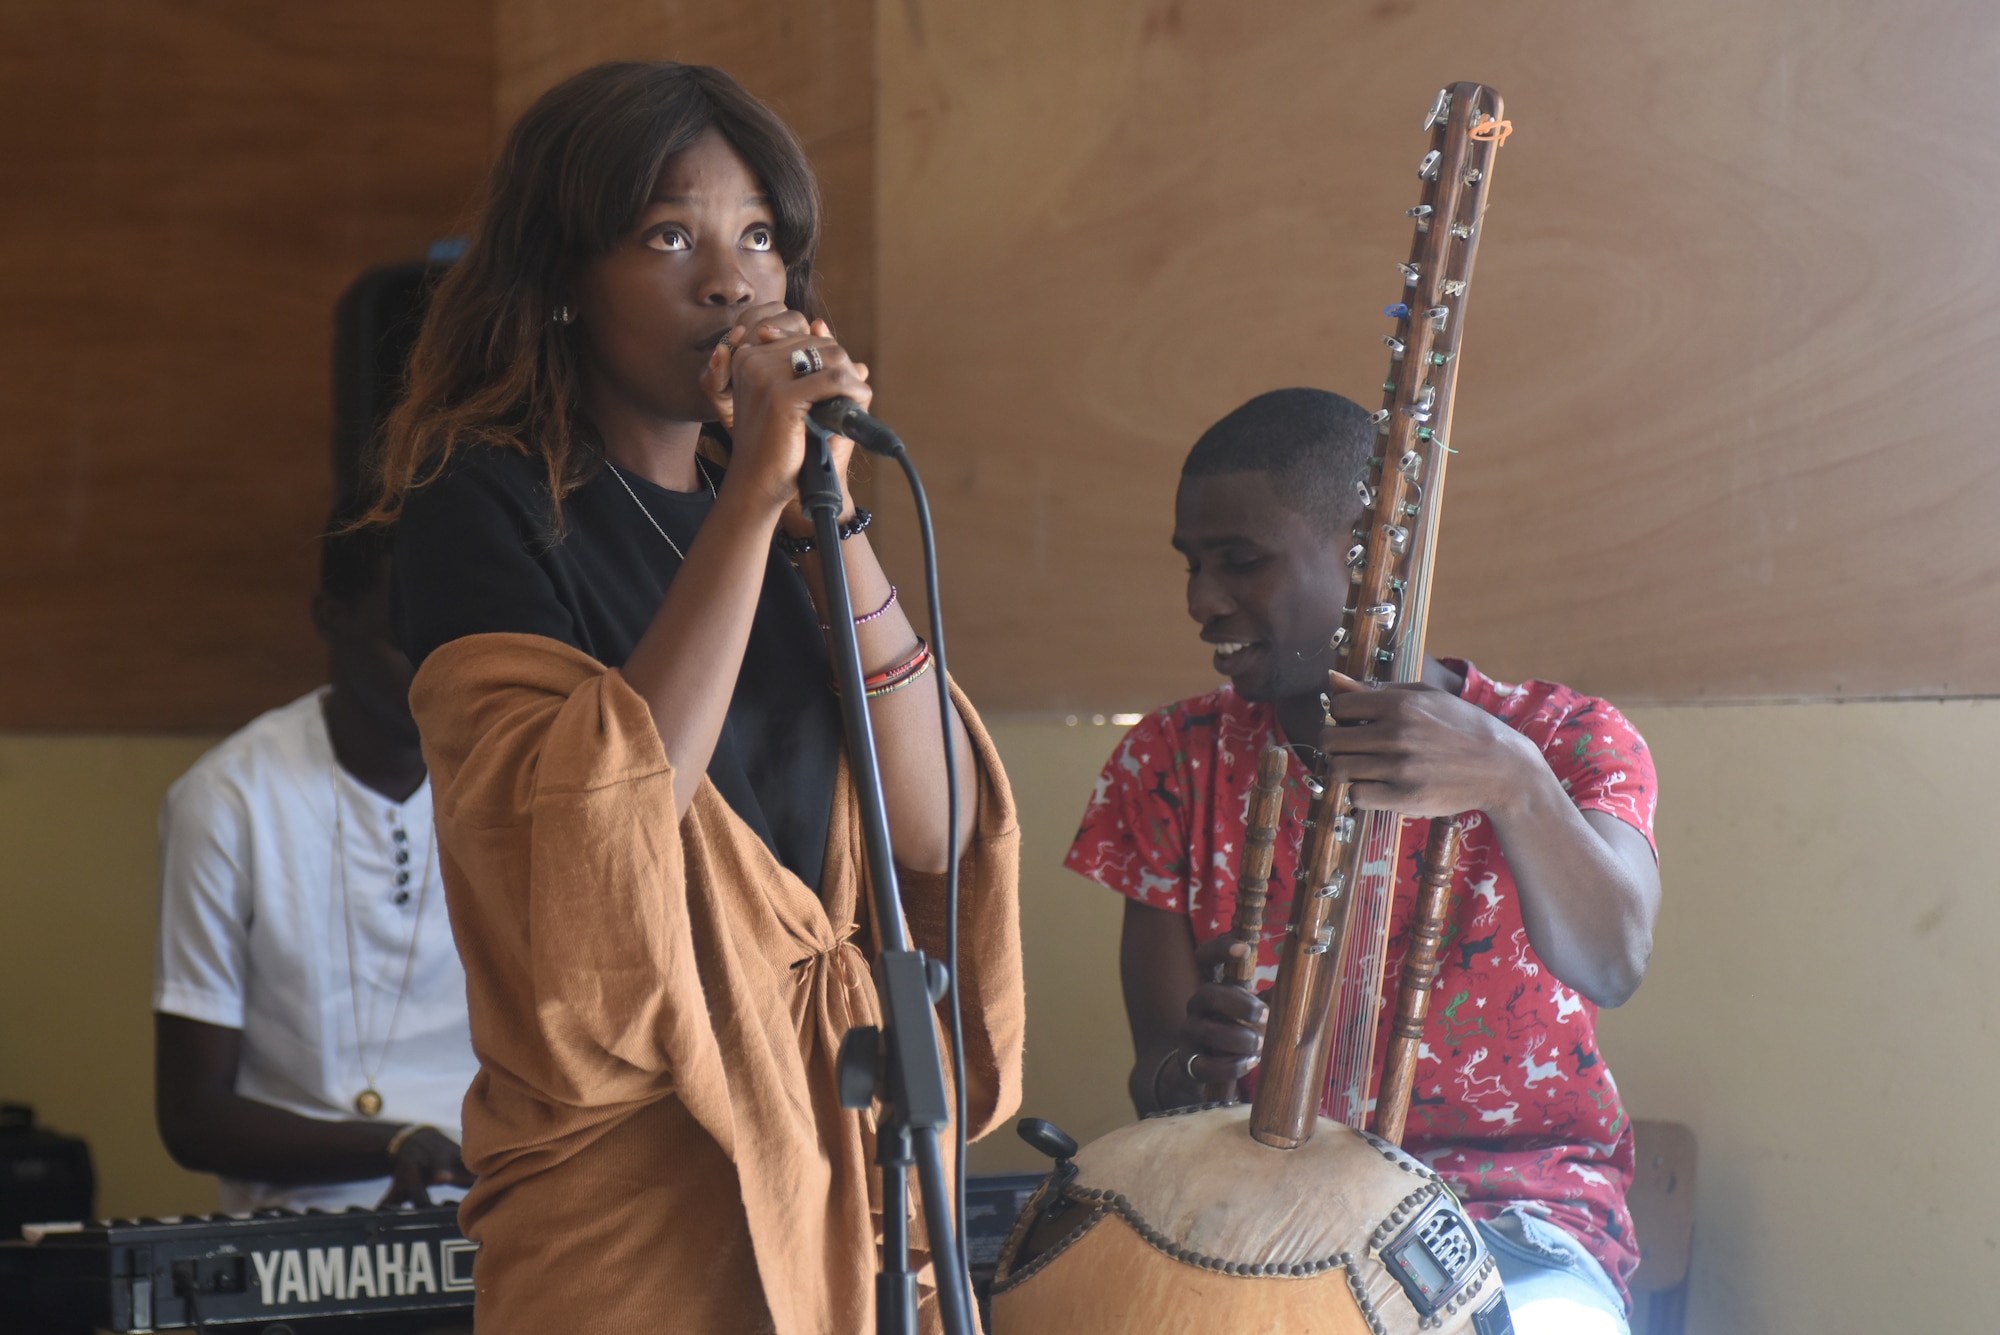 Students perform music at the National School of the Arts in Dakar, Senegal, March 21, 2018. The U.S. Air Forces in Europe Band visited the school to perform for as well as listen to the students’ music. (U.S. Air Force photo by Airman 1st Class Eli Chevalier)